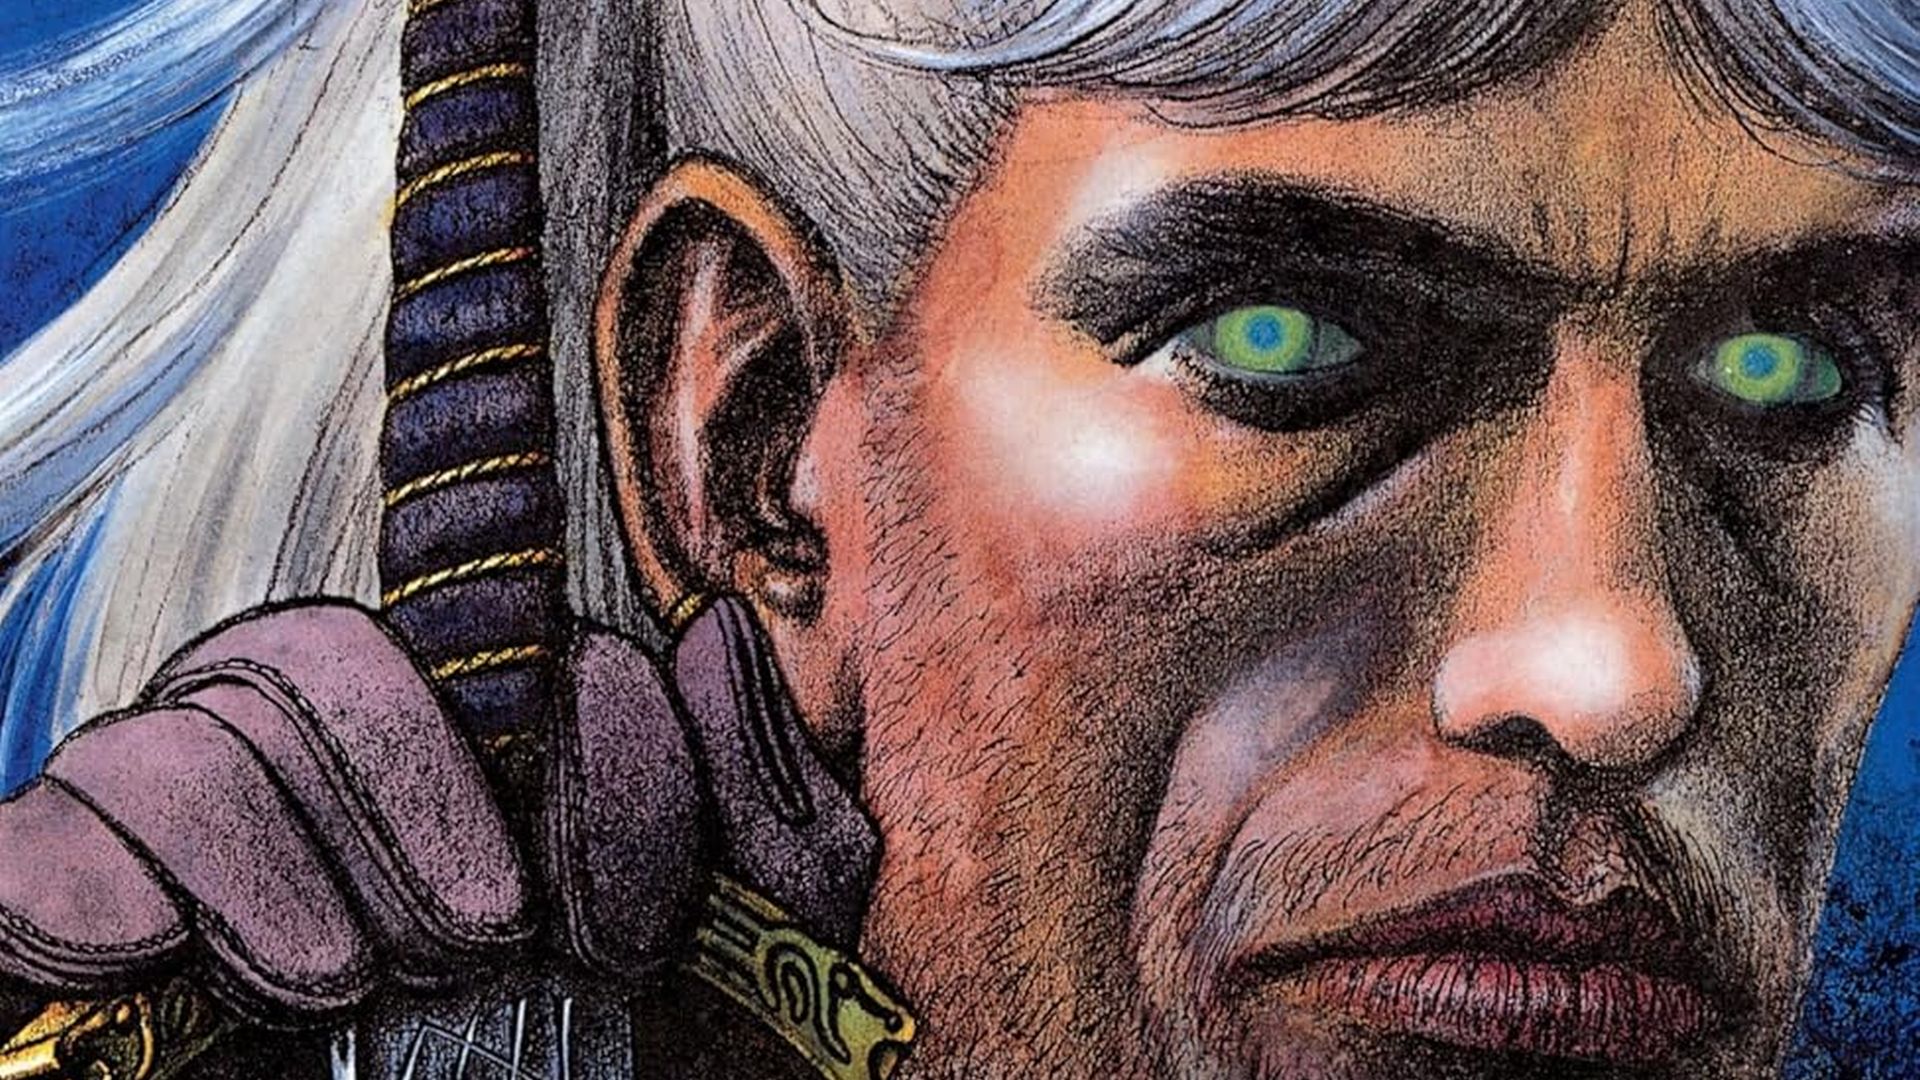 The Polish Witcher comics from the ’90s where Geralt has terrible hair are being translated into English